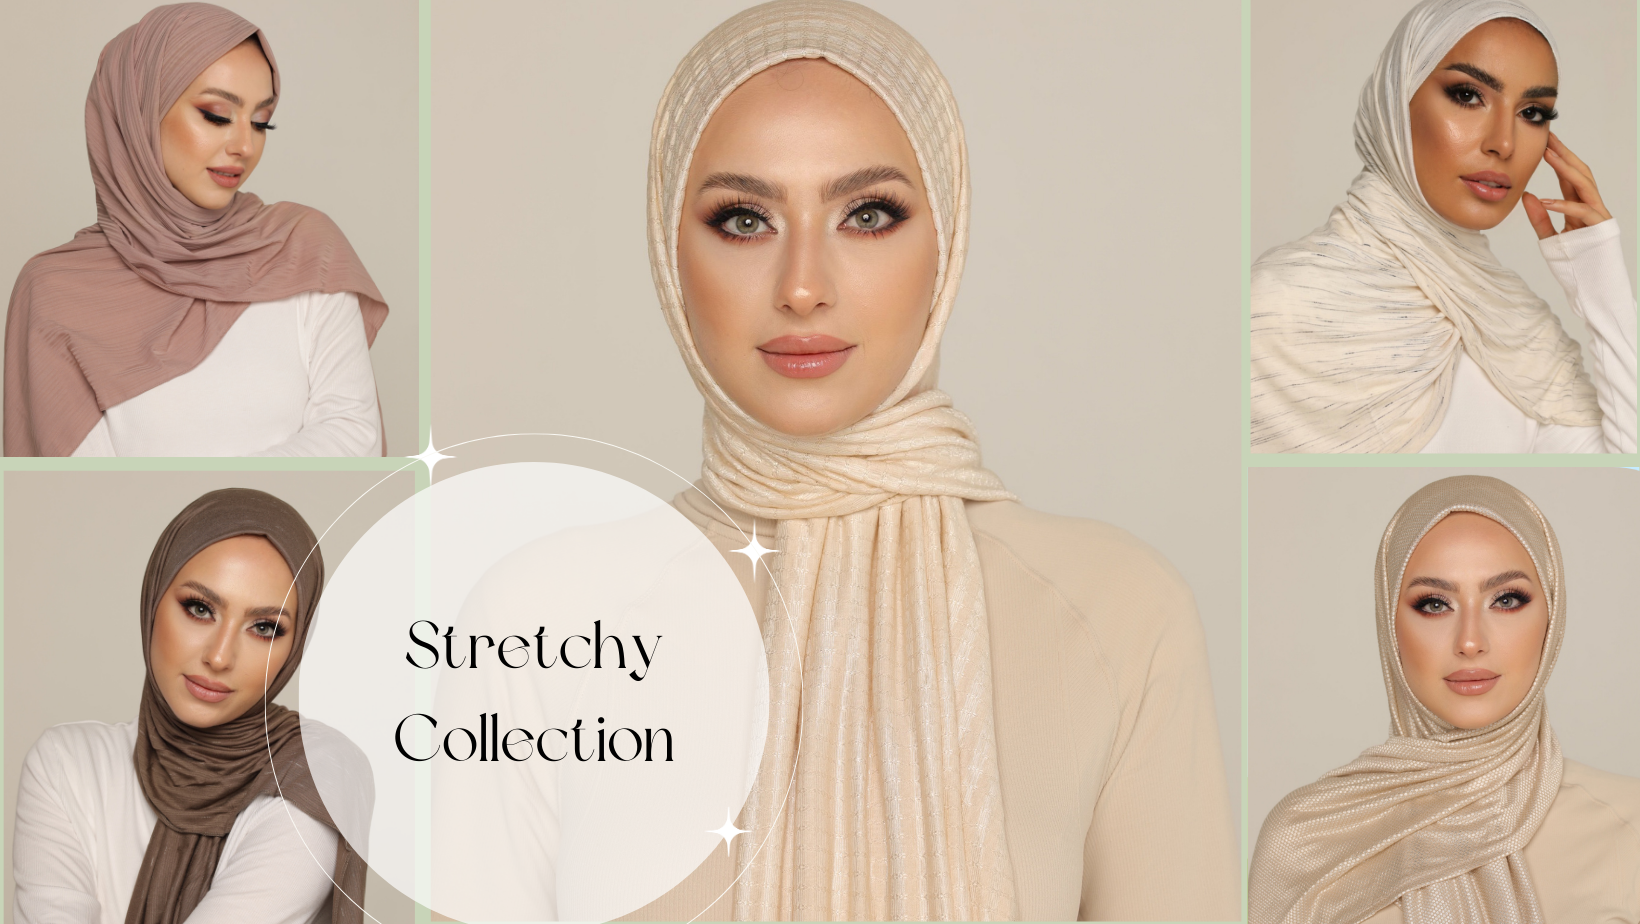 The most choice in premium hijabs!